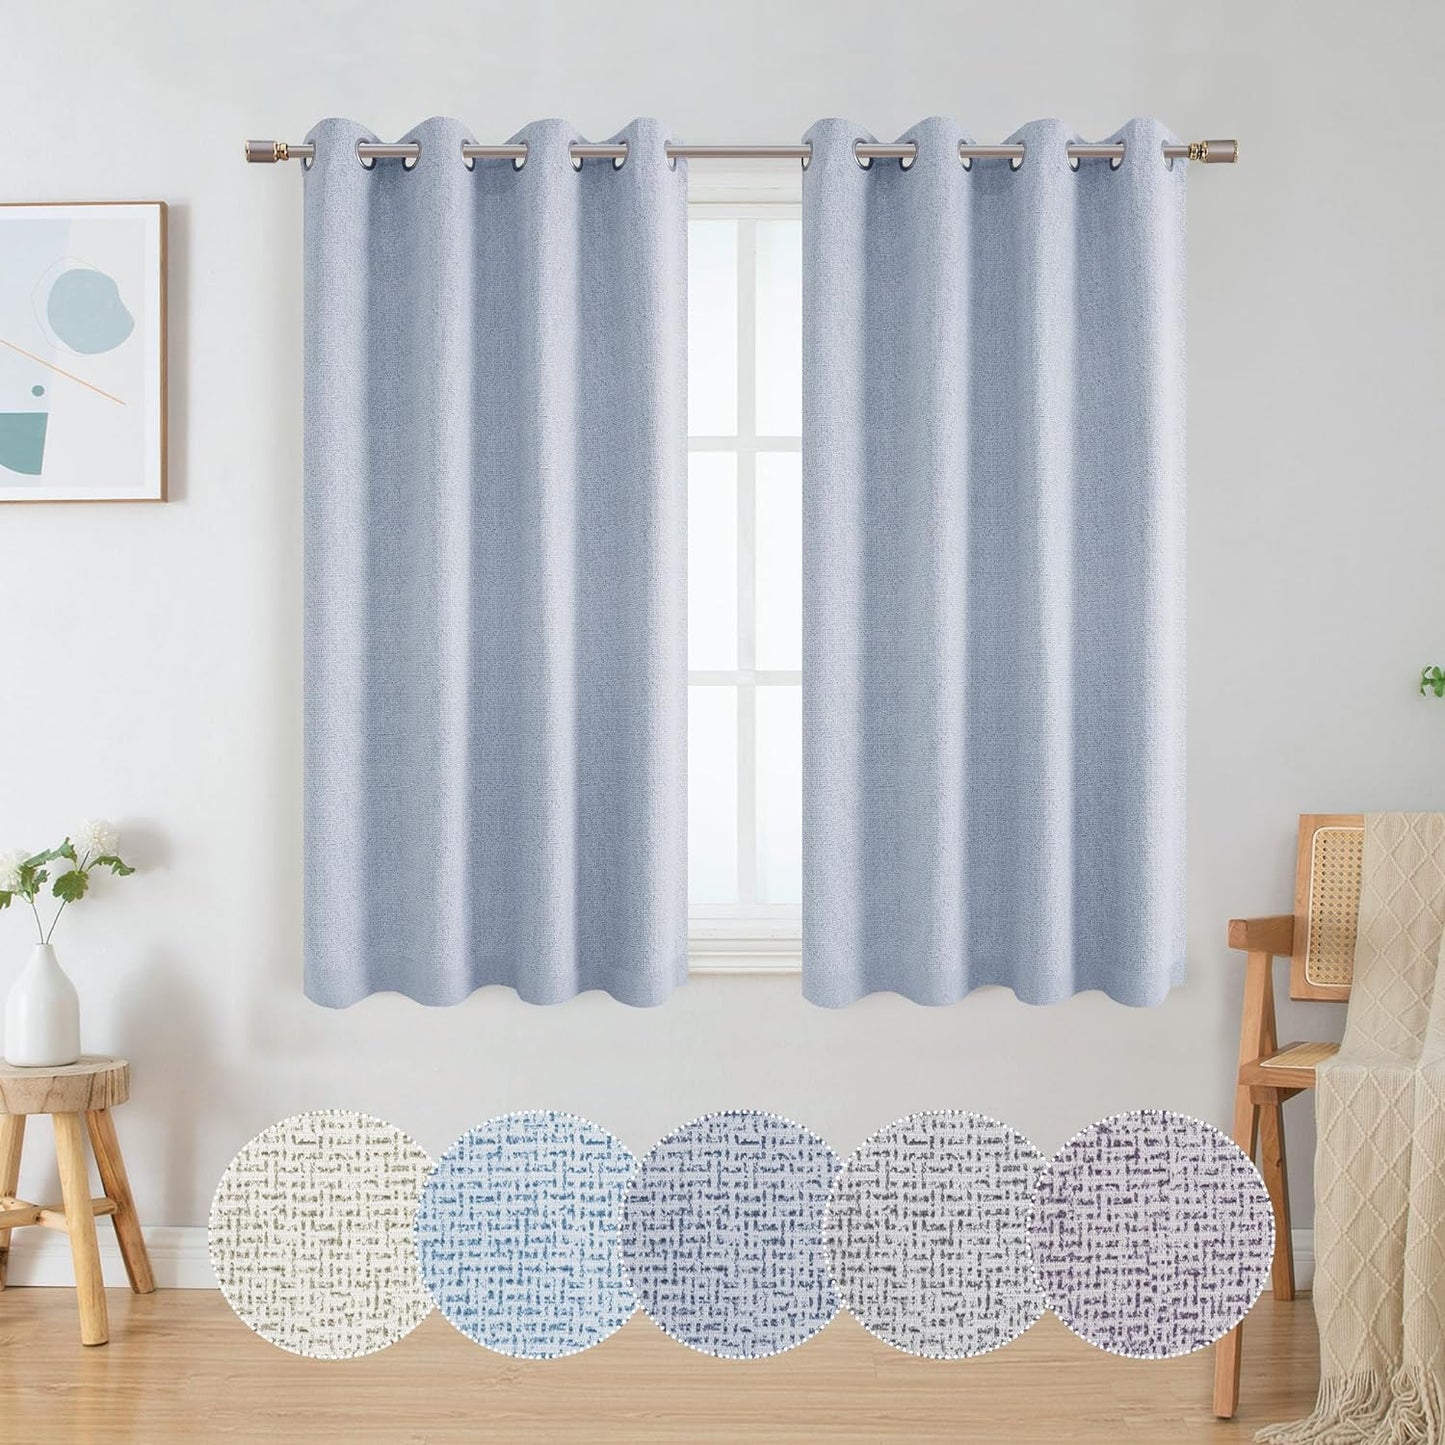 OWENIE Luke Black Out Curtains 63 Inch Long 2 Panels for Bedroom, Geometric Printed Completely Blackout Room Darkening Curtains, Grommet Thermal Insulated Living Room Curtain, 2 PCS, Each 42Wx63L Inch  OWENIE Light Blue 42"W X 45"L | 2 Pcs 